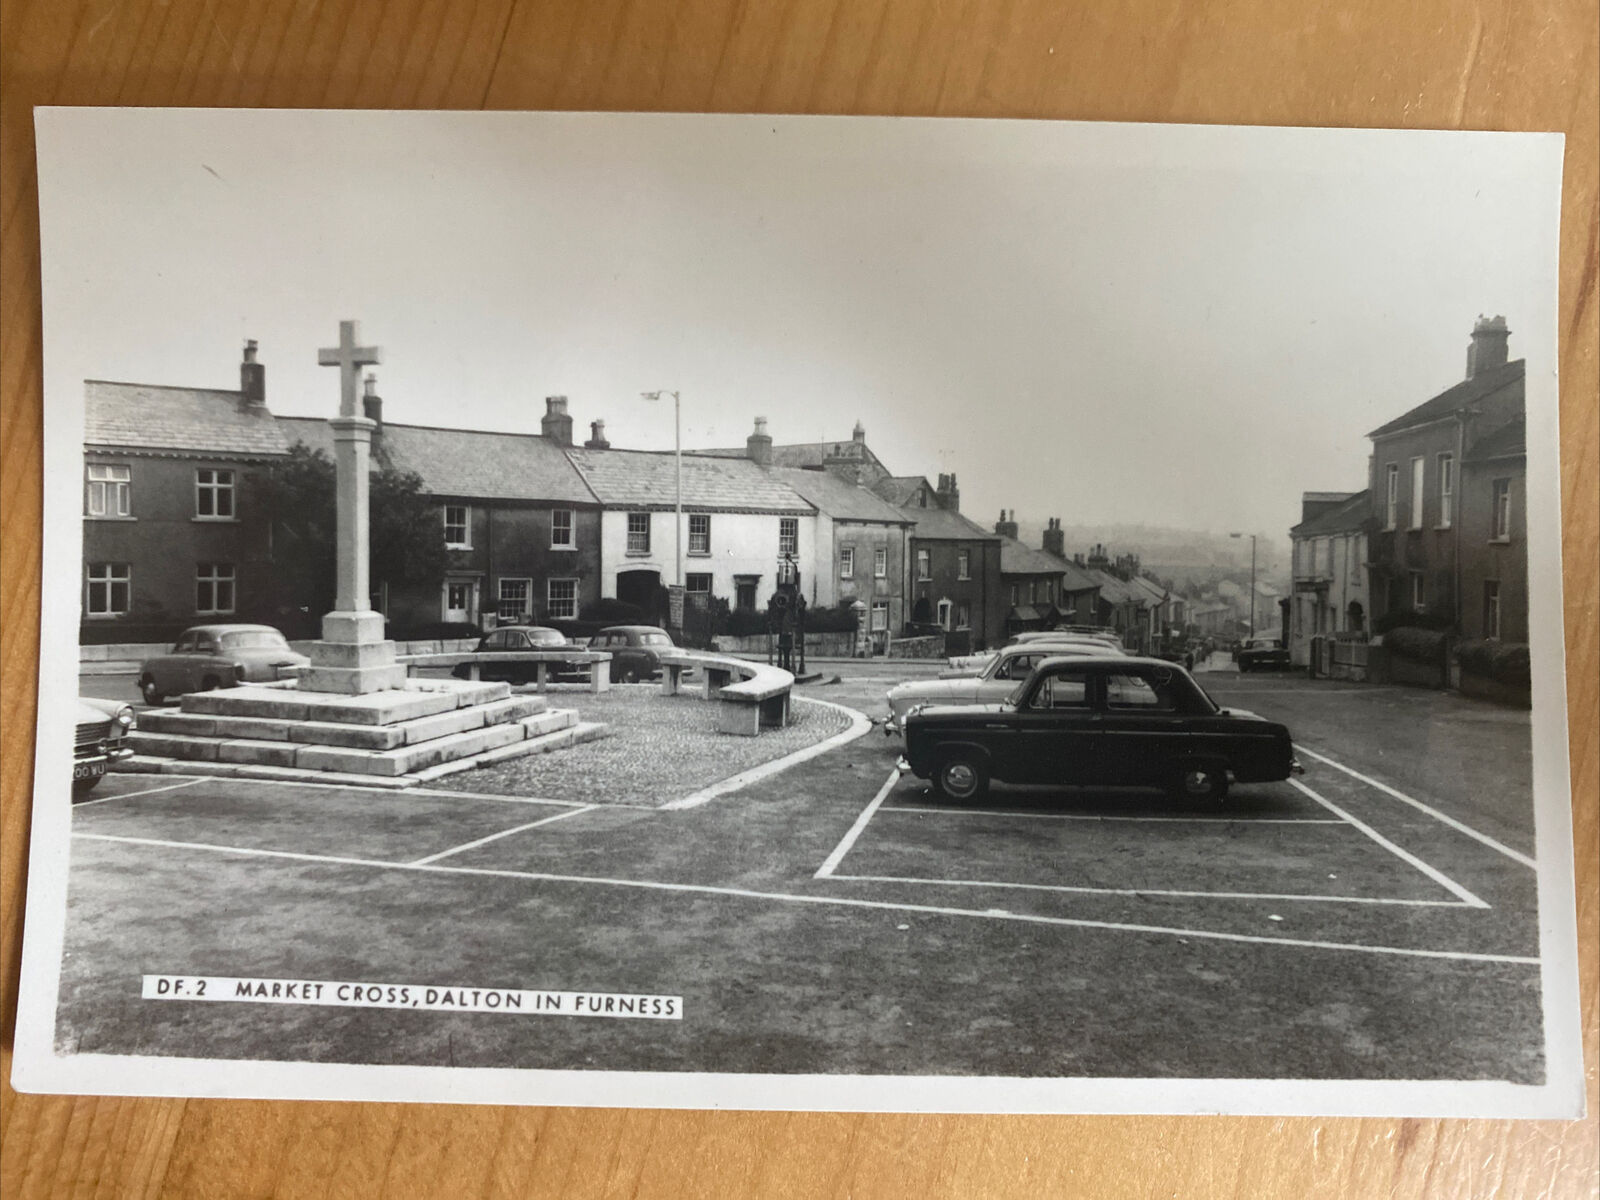 House Clearance - DALTON In FURNESS Cumbria Market Cross VINTAGE FRITHS SERIES 1950s Real Photo